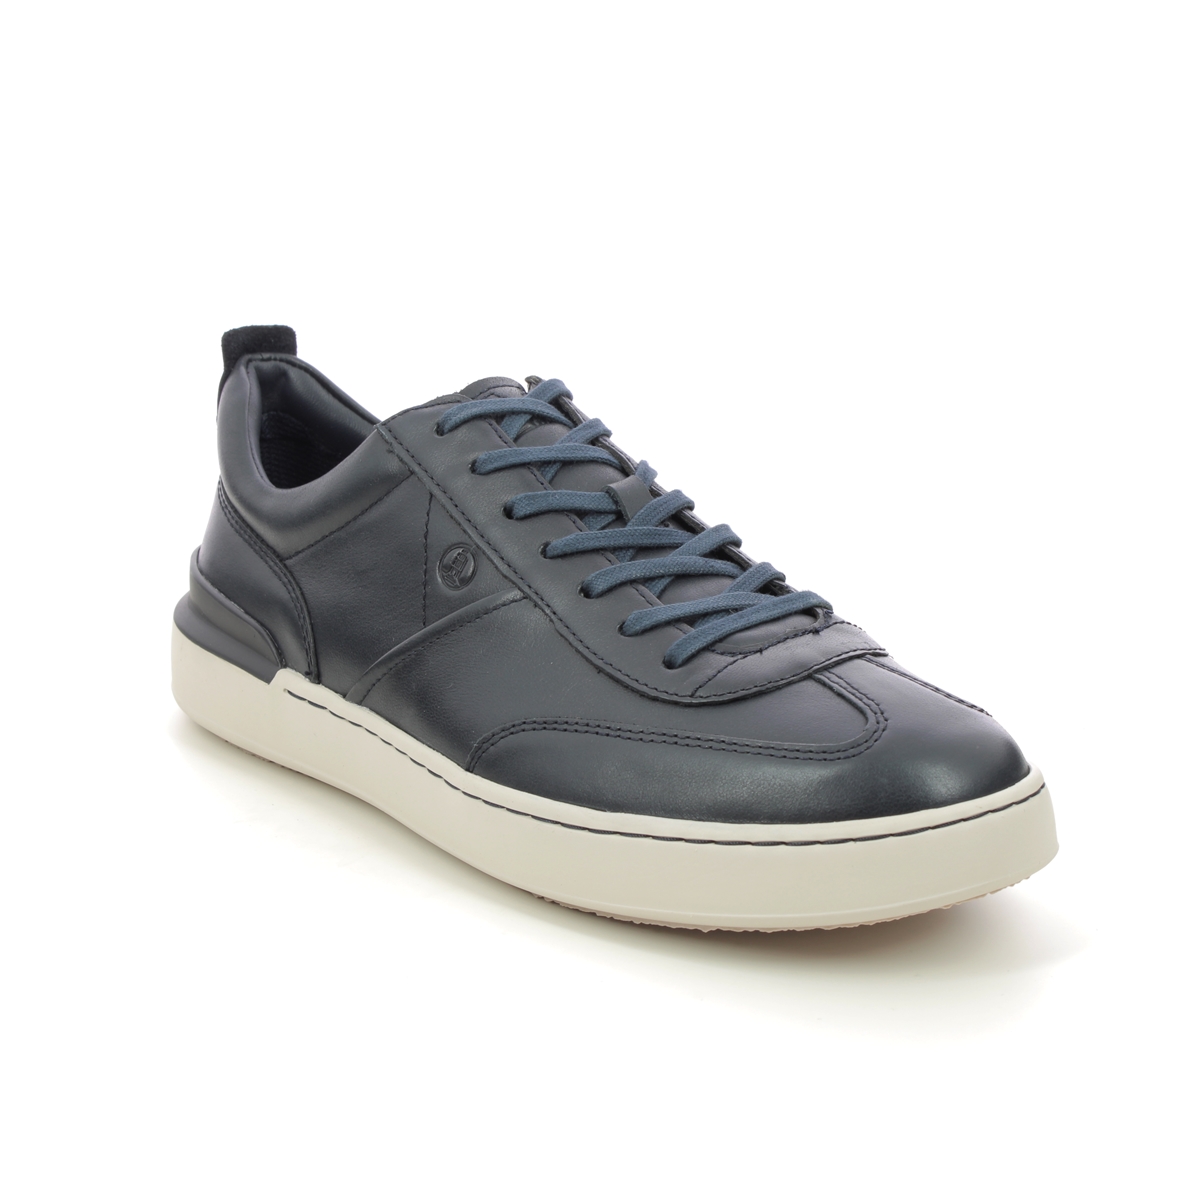 Clarks Courtlite Mode Navy Leather Mens Trainers 734747G In Size 9 In Plain Navy Leather G Width Fitting